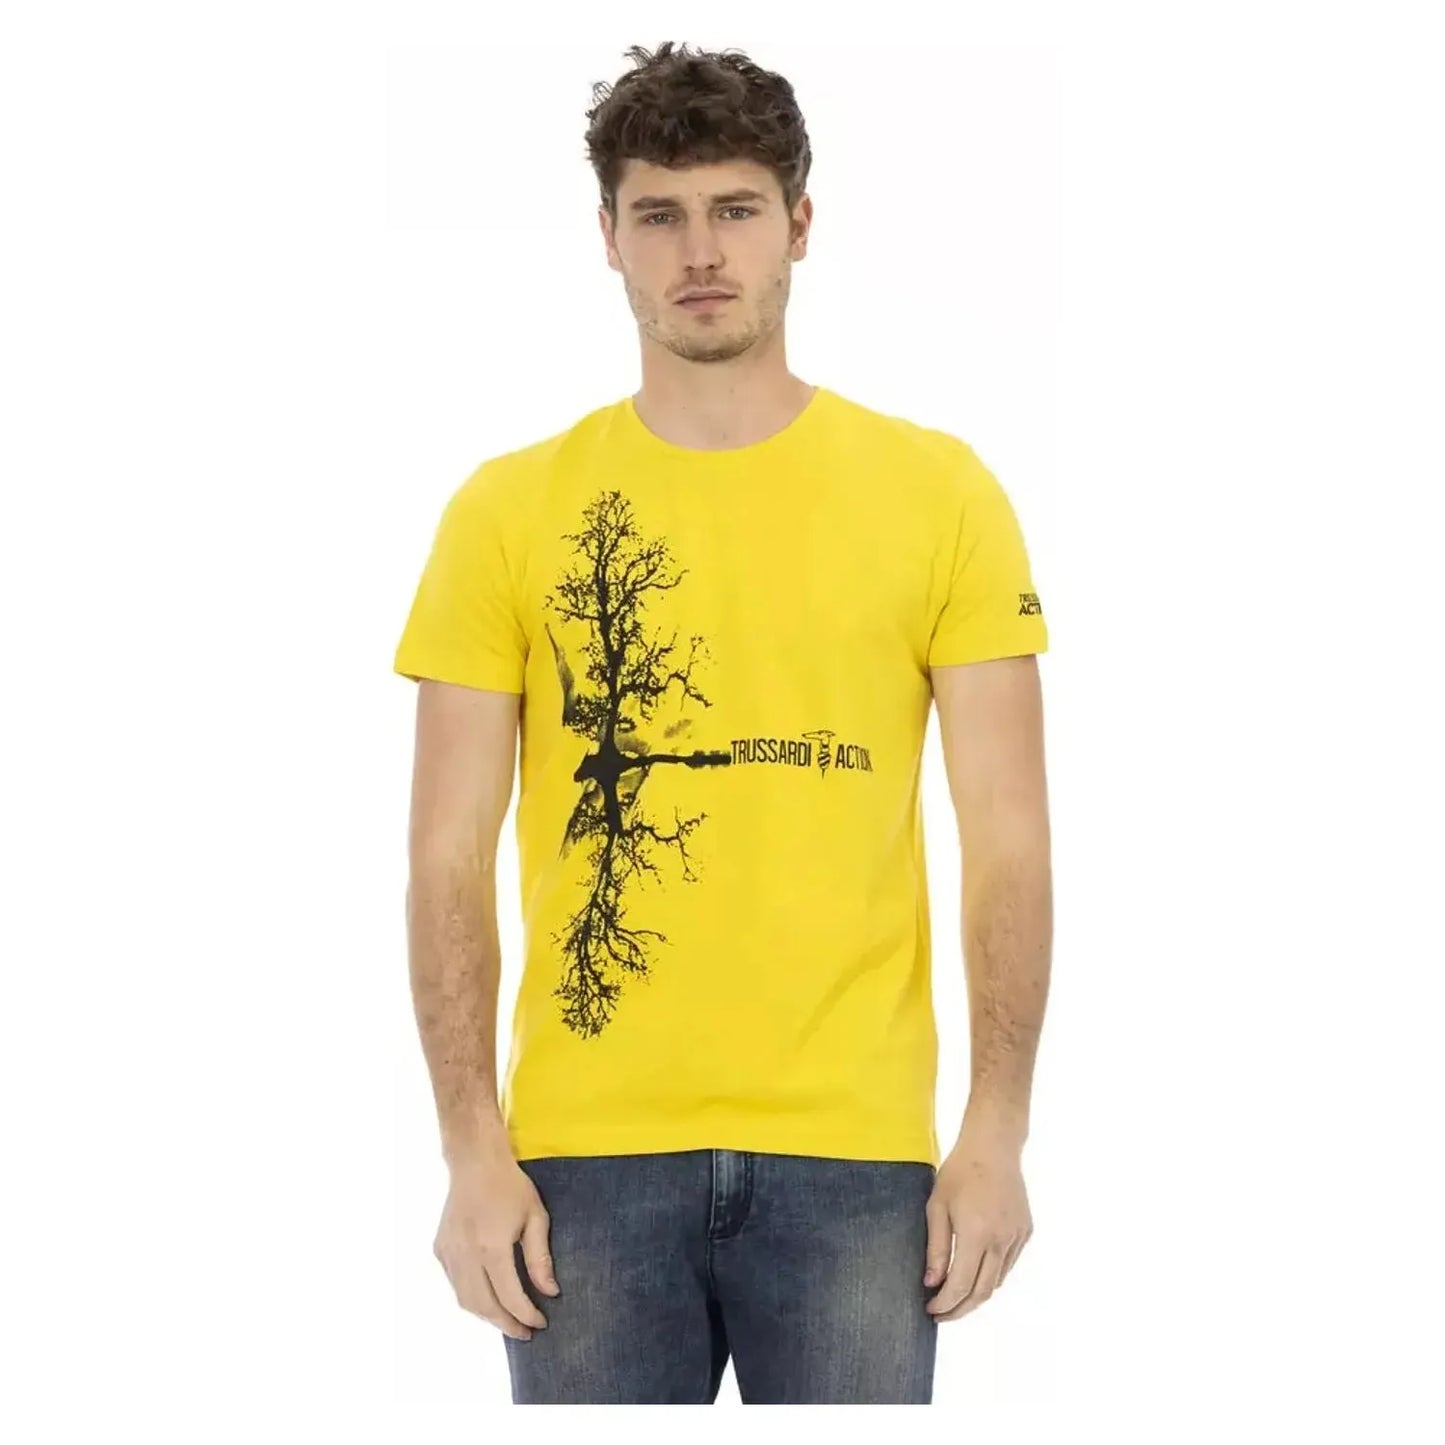 Trussardi Action Sunny Day Casual Chic Cotton Tee yellow-cotton-t-shirt-9